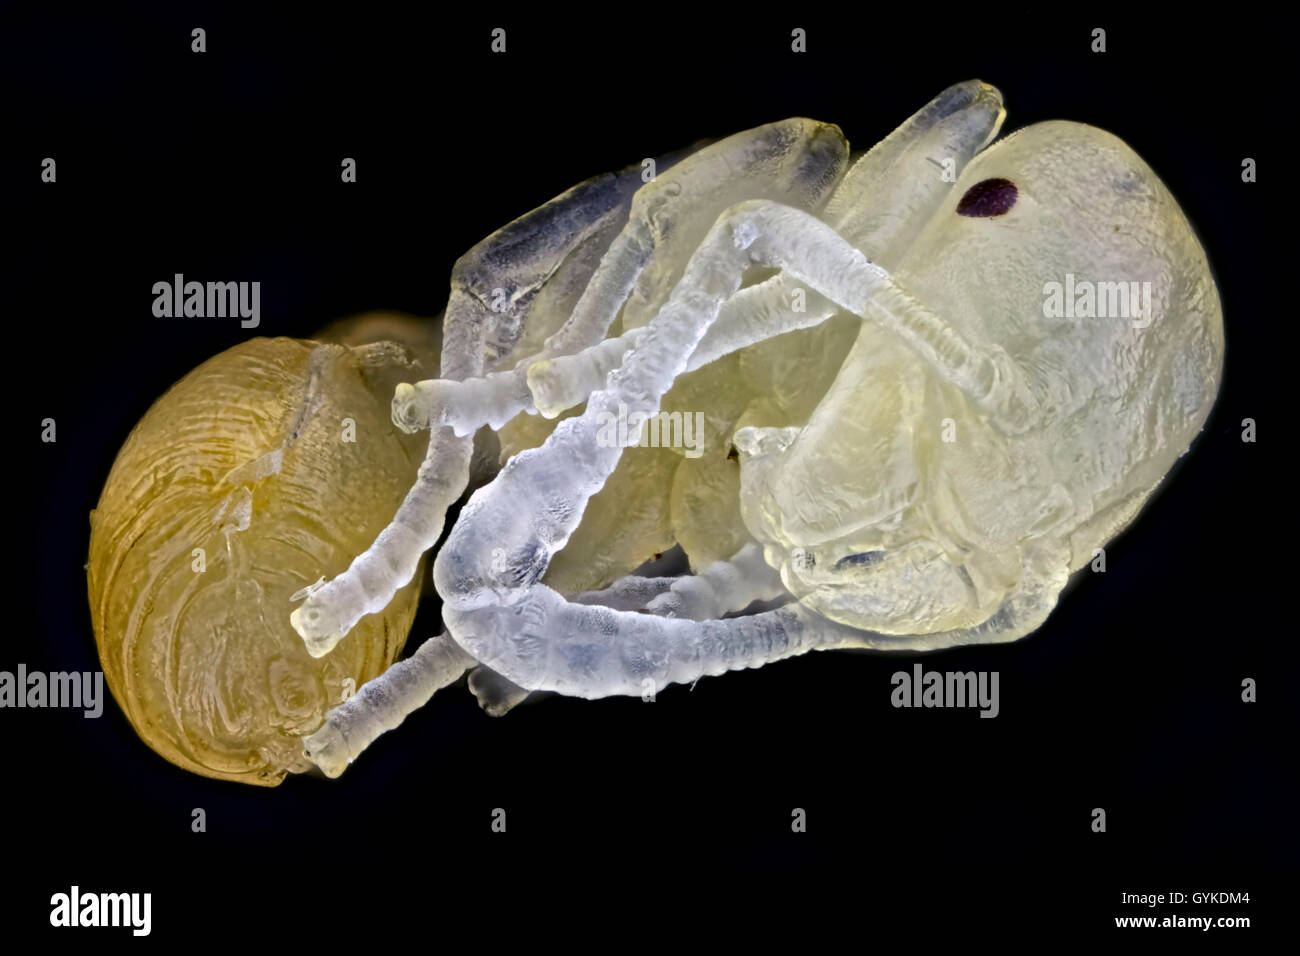 Ameise   (Formicidae), Ameisenpuppe | ant (Formicidae), pupa of an ant | BLWS418977.jpg [ (c) blickwinkel/F. Fox Tel. +49 (0)230 Stock Photo